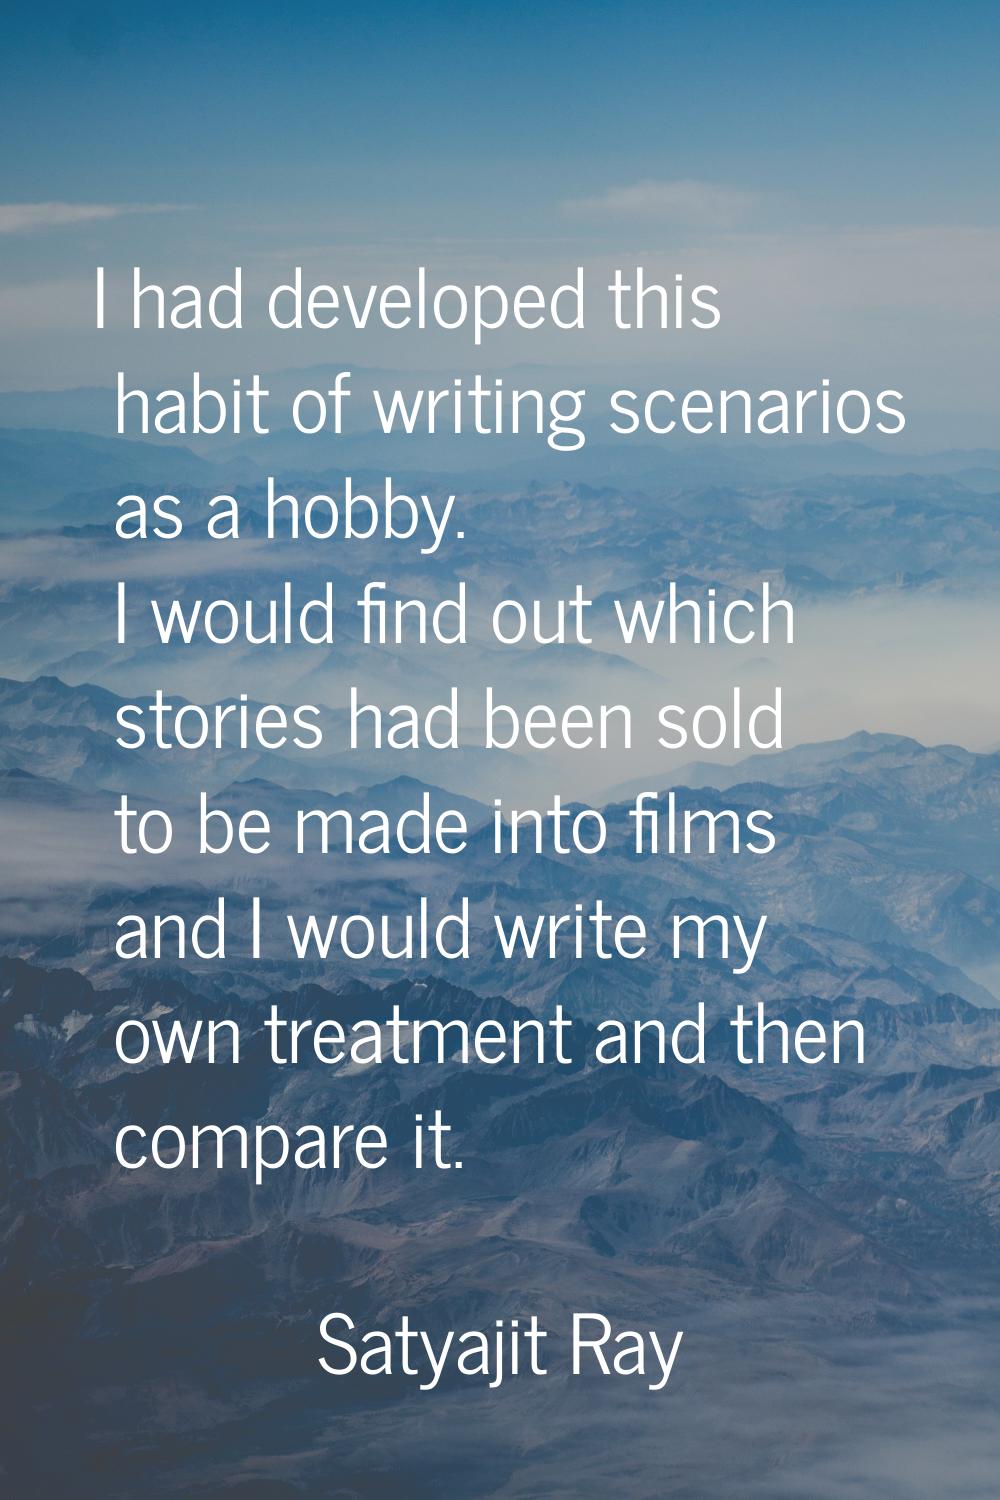 I had developed this habit of writing scenarios as a hobby. I would find out which stories had been